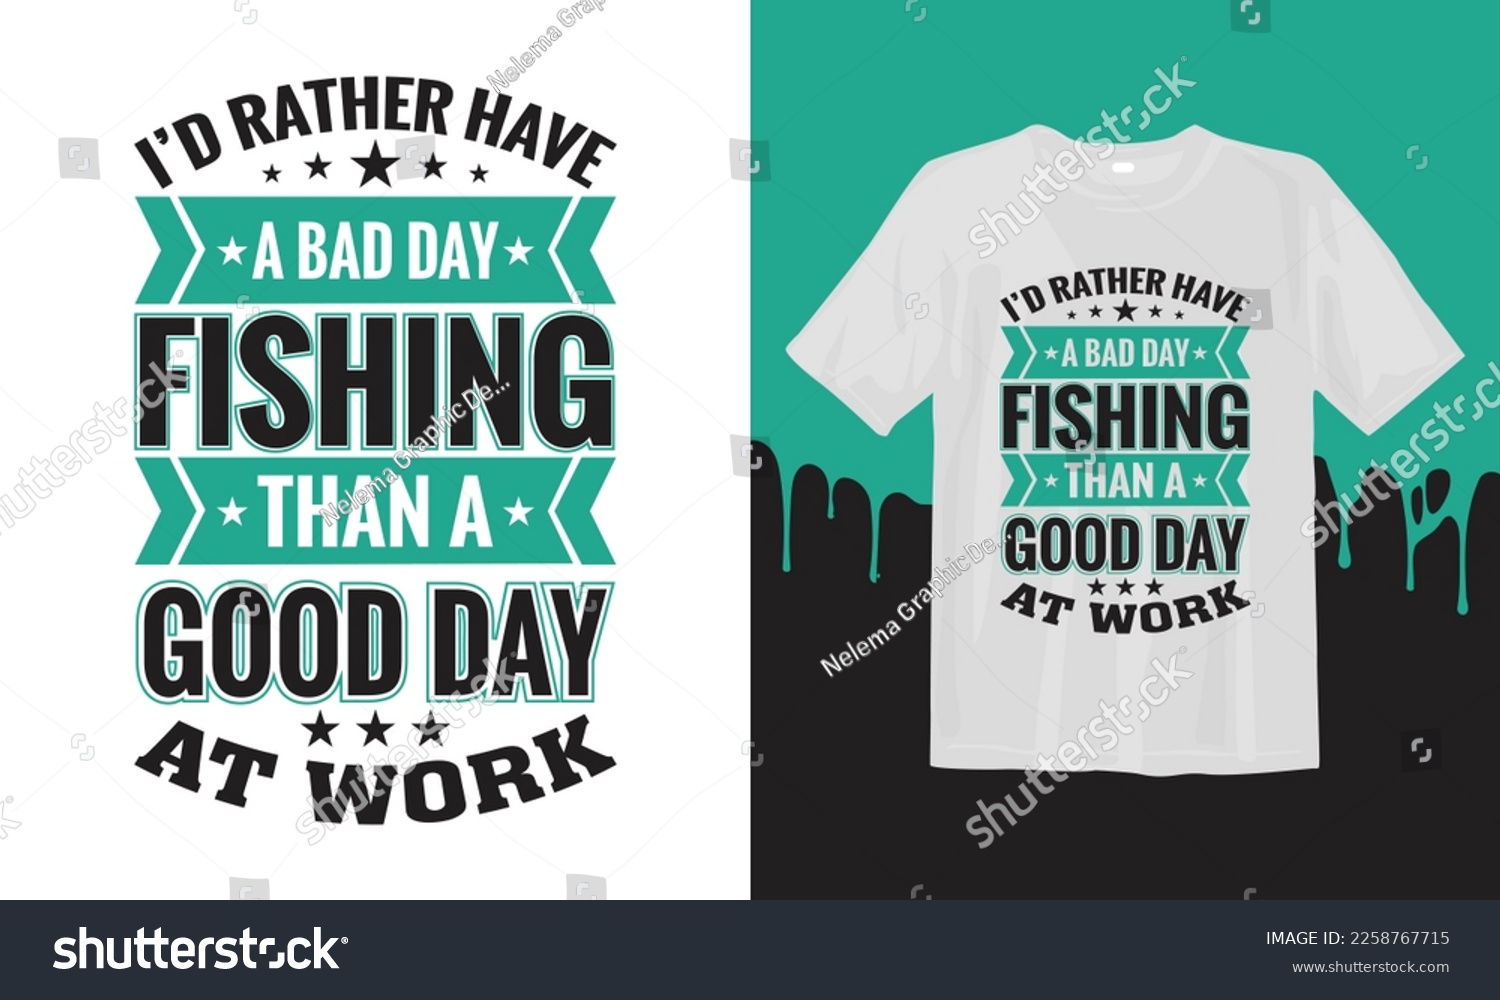 SVG of I'd Rather Have A bad Day Fishing than a Good Day At Work. svg